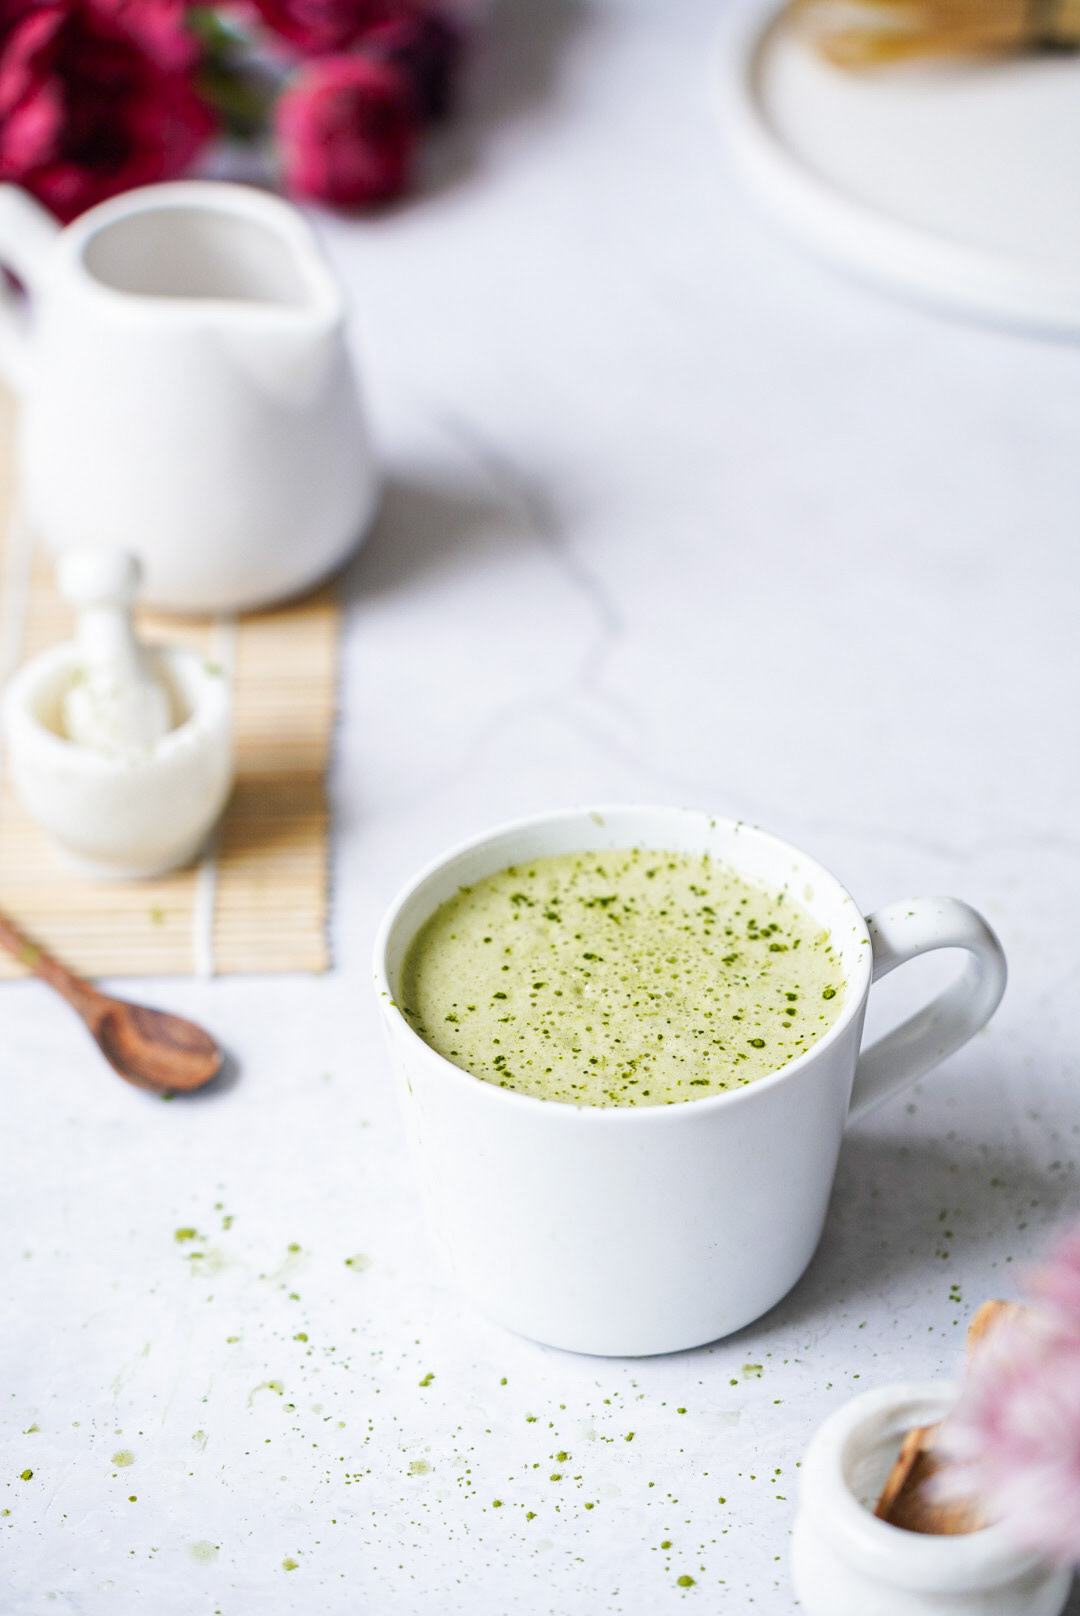 Beverage photography Drinks Photography food photography food styling Indian Food Photography Matcha Latte